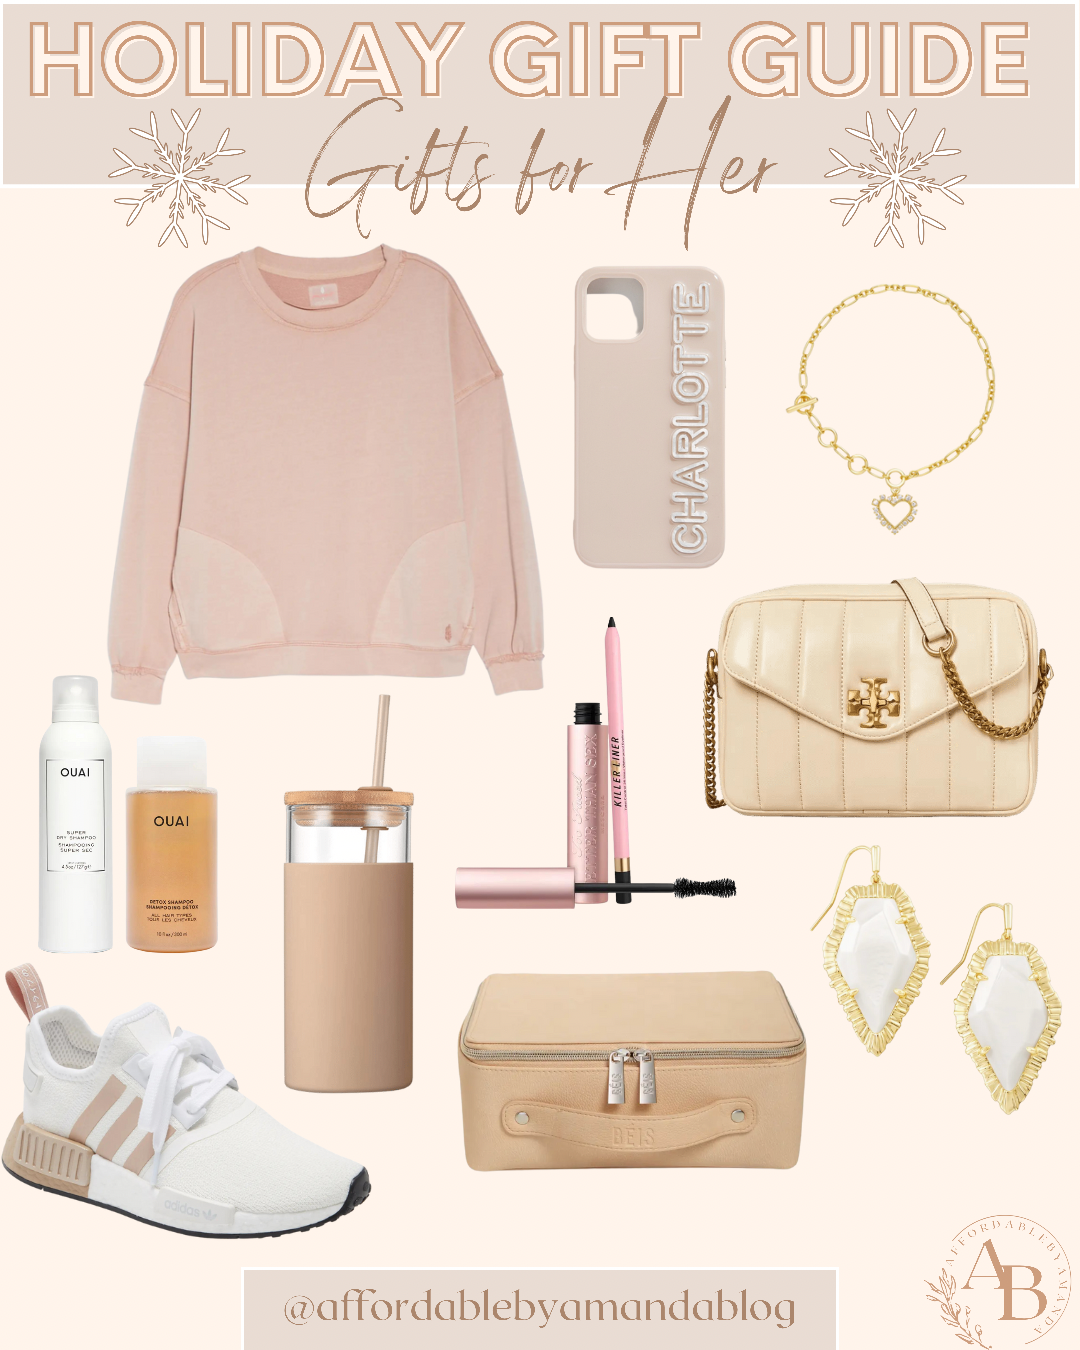 Holiday Gift Guide: Gifts for Her - Affordable by Amanda